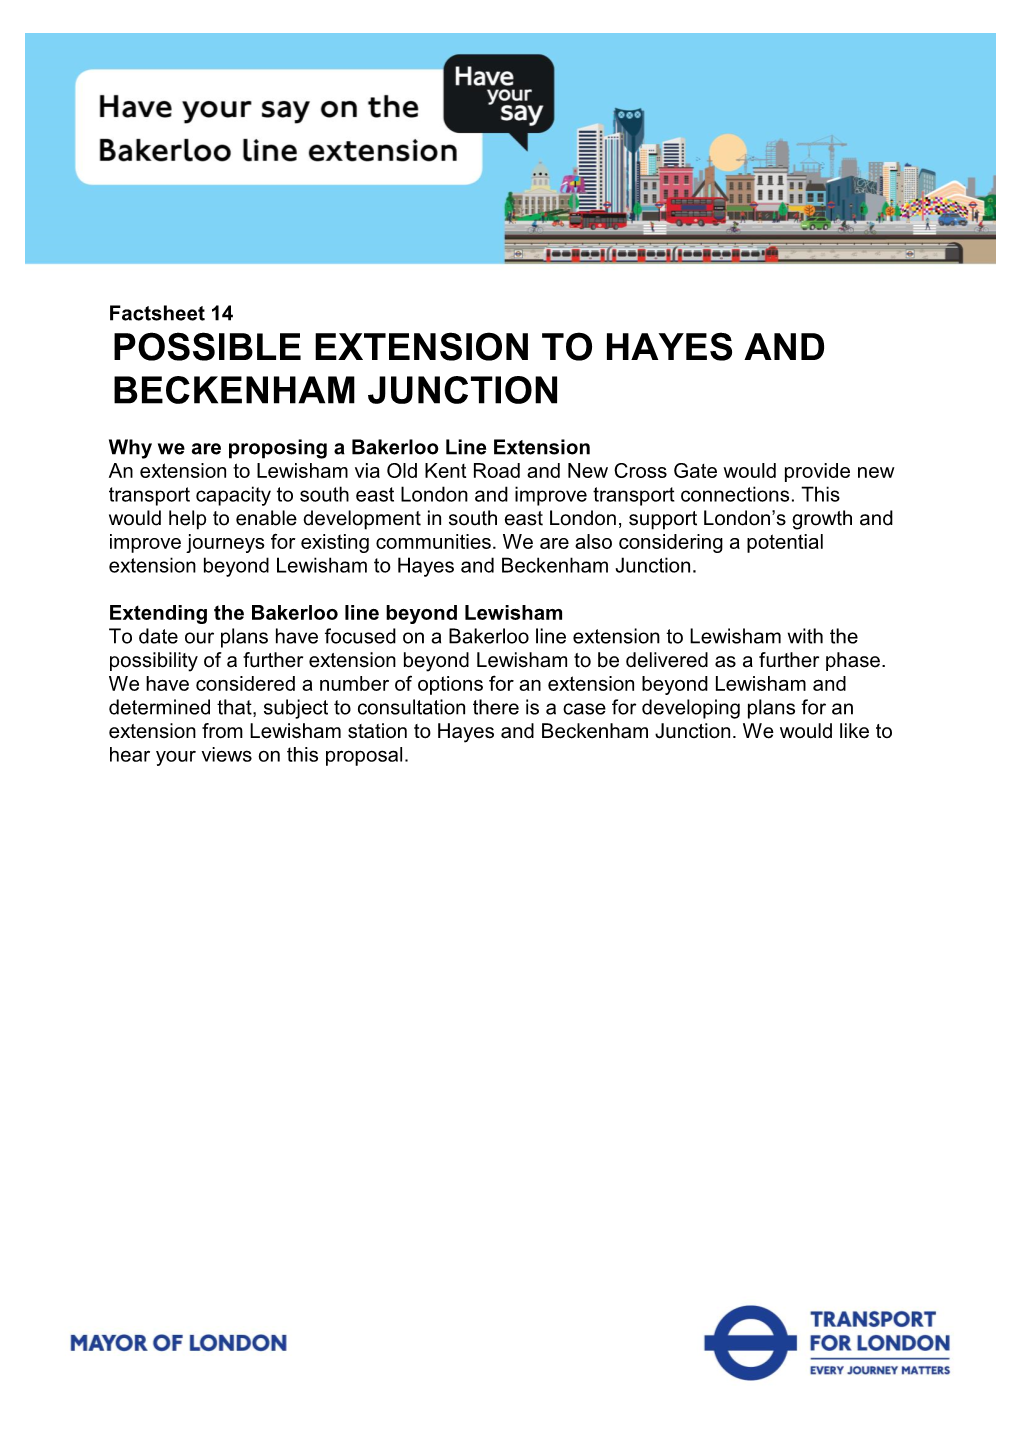 Factsheet 14. Possible Extension to Hayes and Beckenham Junction